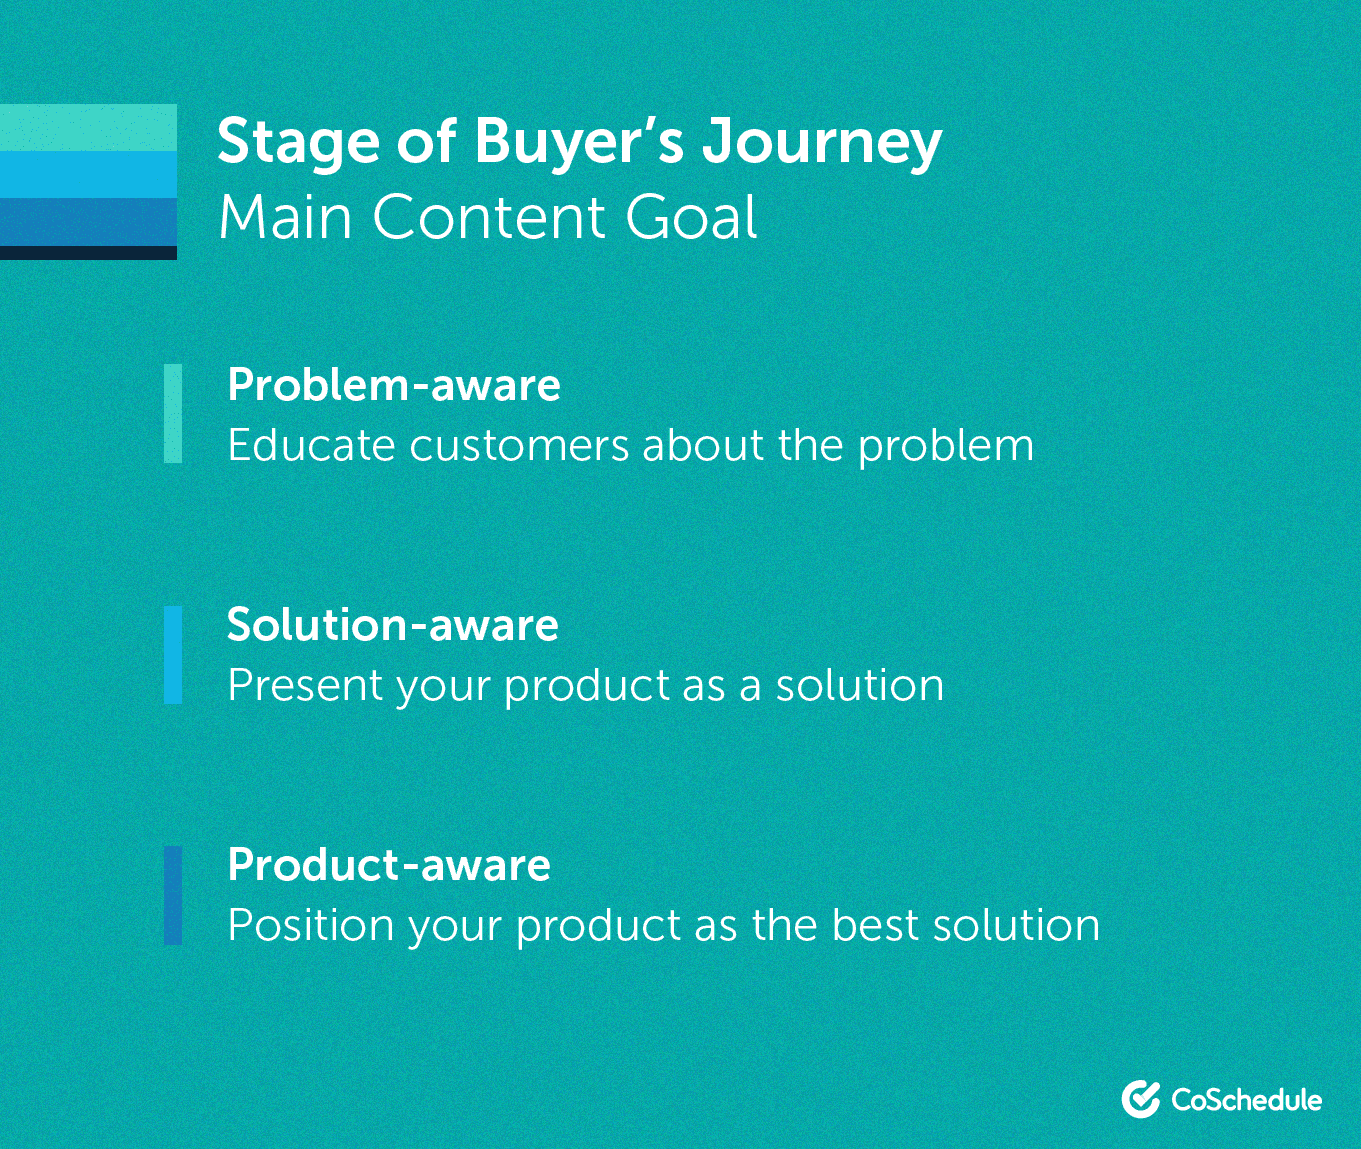 Stages of the buyer journey through the marketing funnel